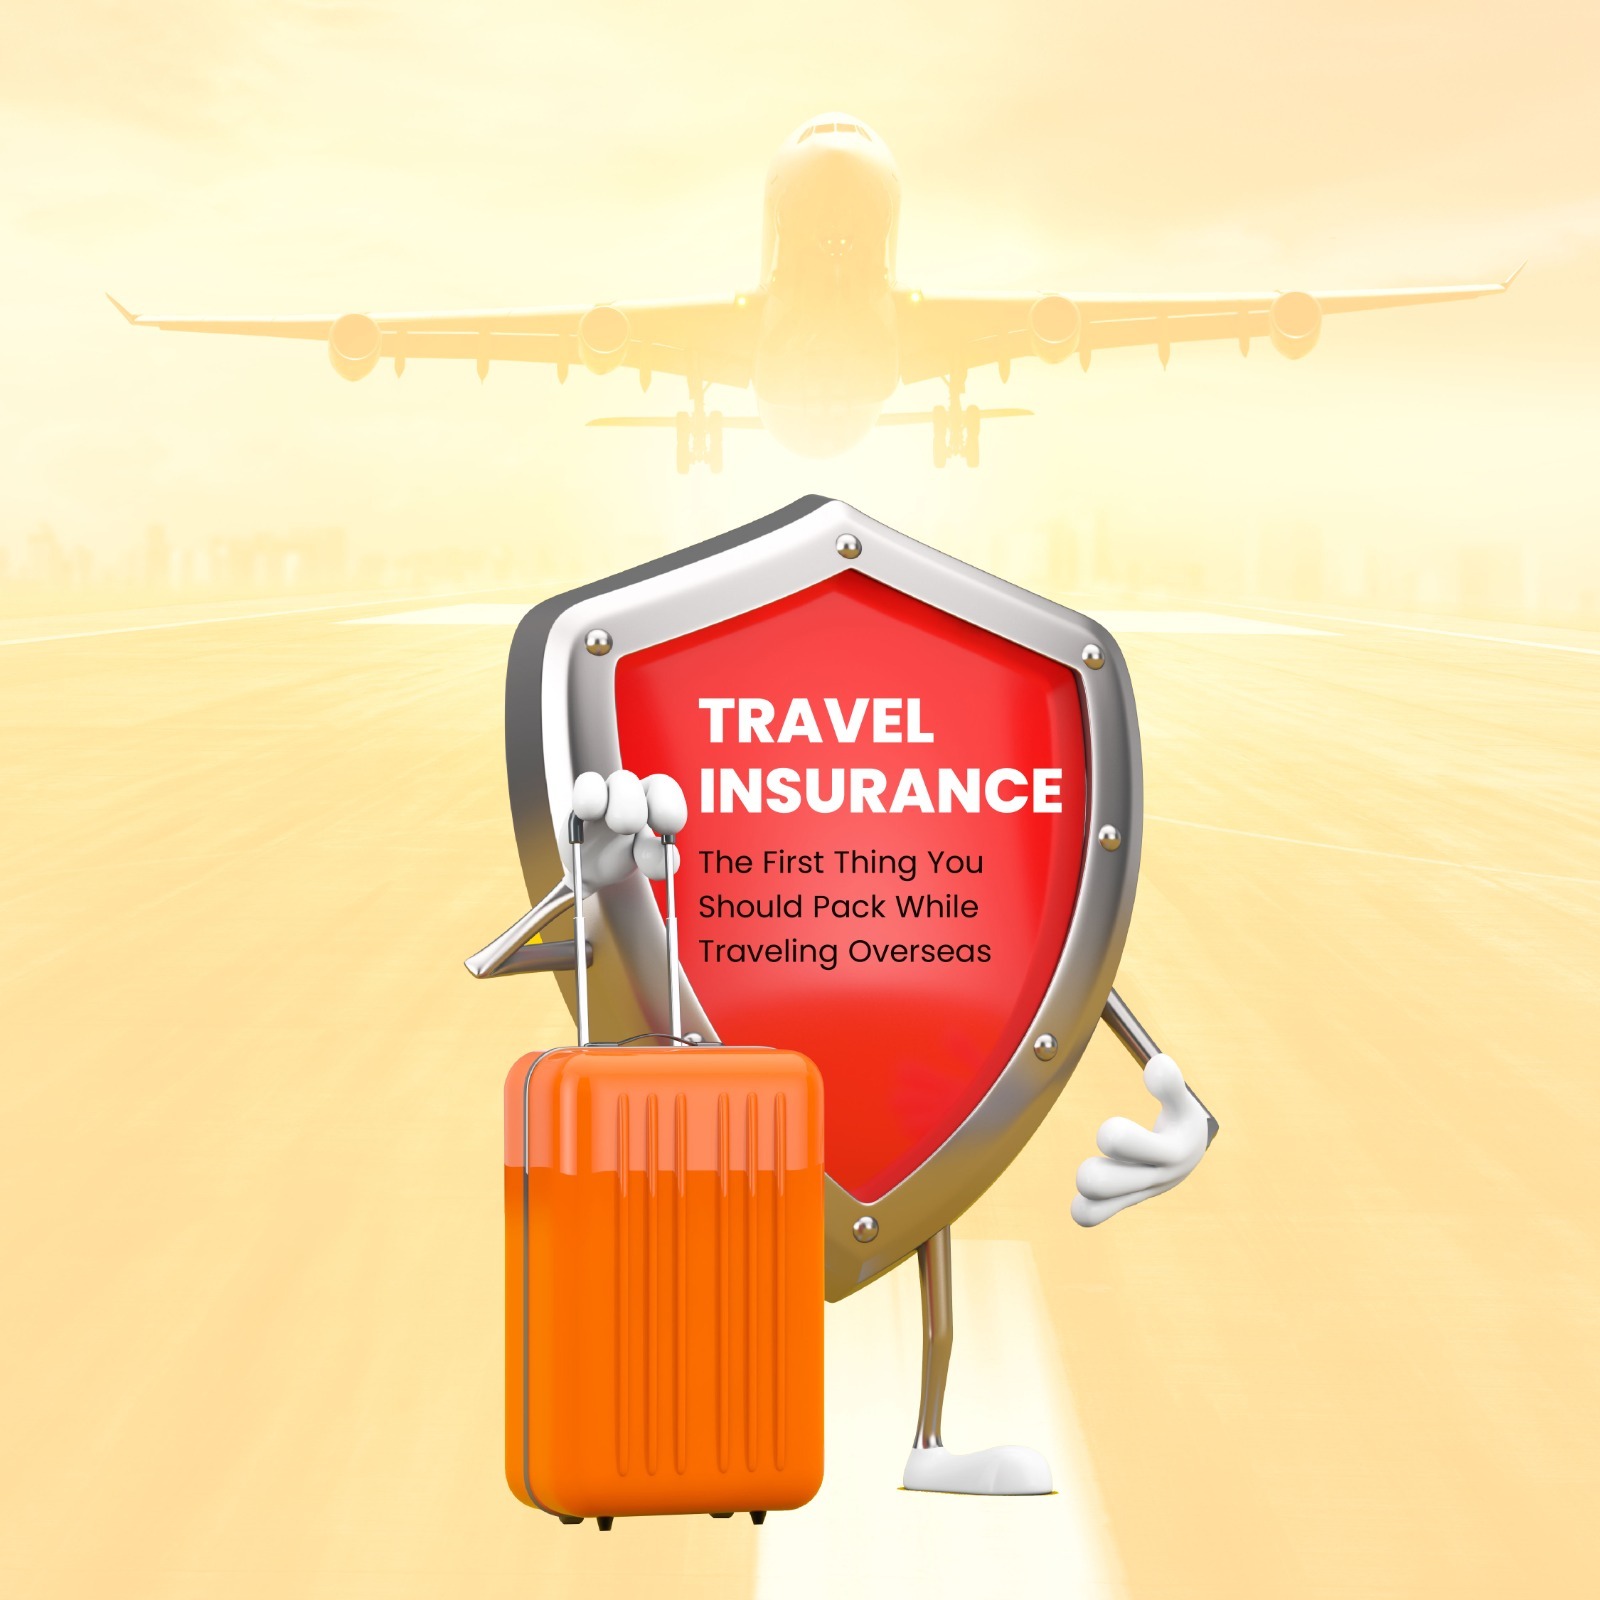 A journey through travel insurance in the USA